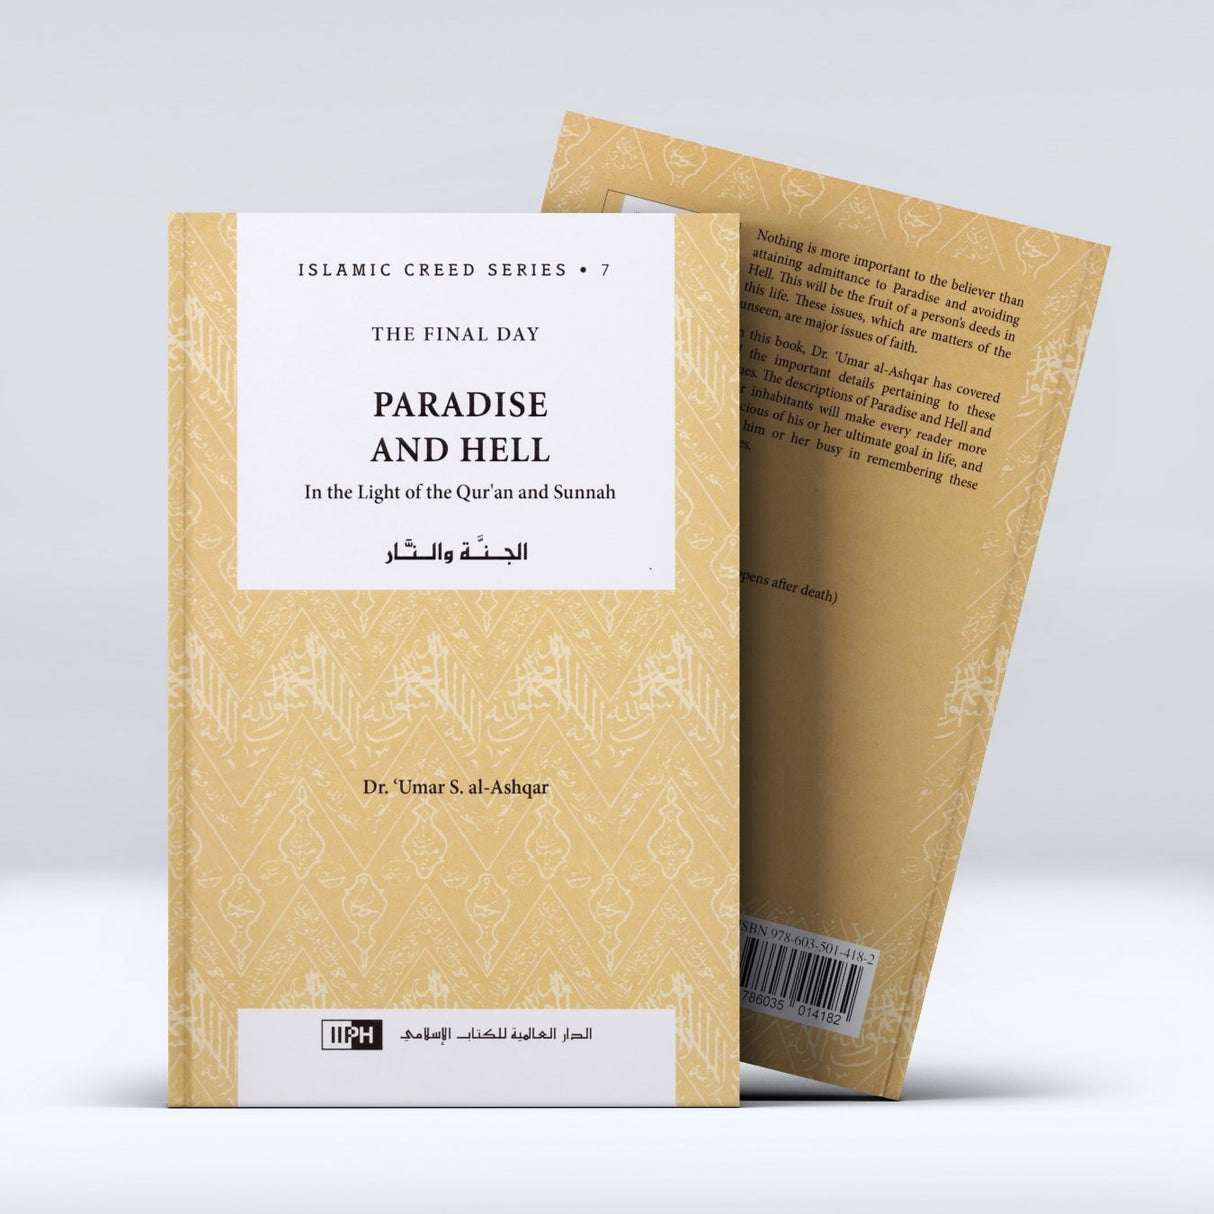 Islamic Creed Series Vol. 7 - Paradise and Hell: In the Light of the Qur'an and Sunnah